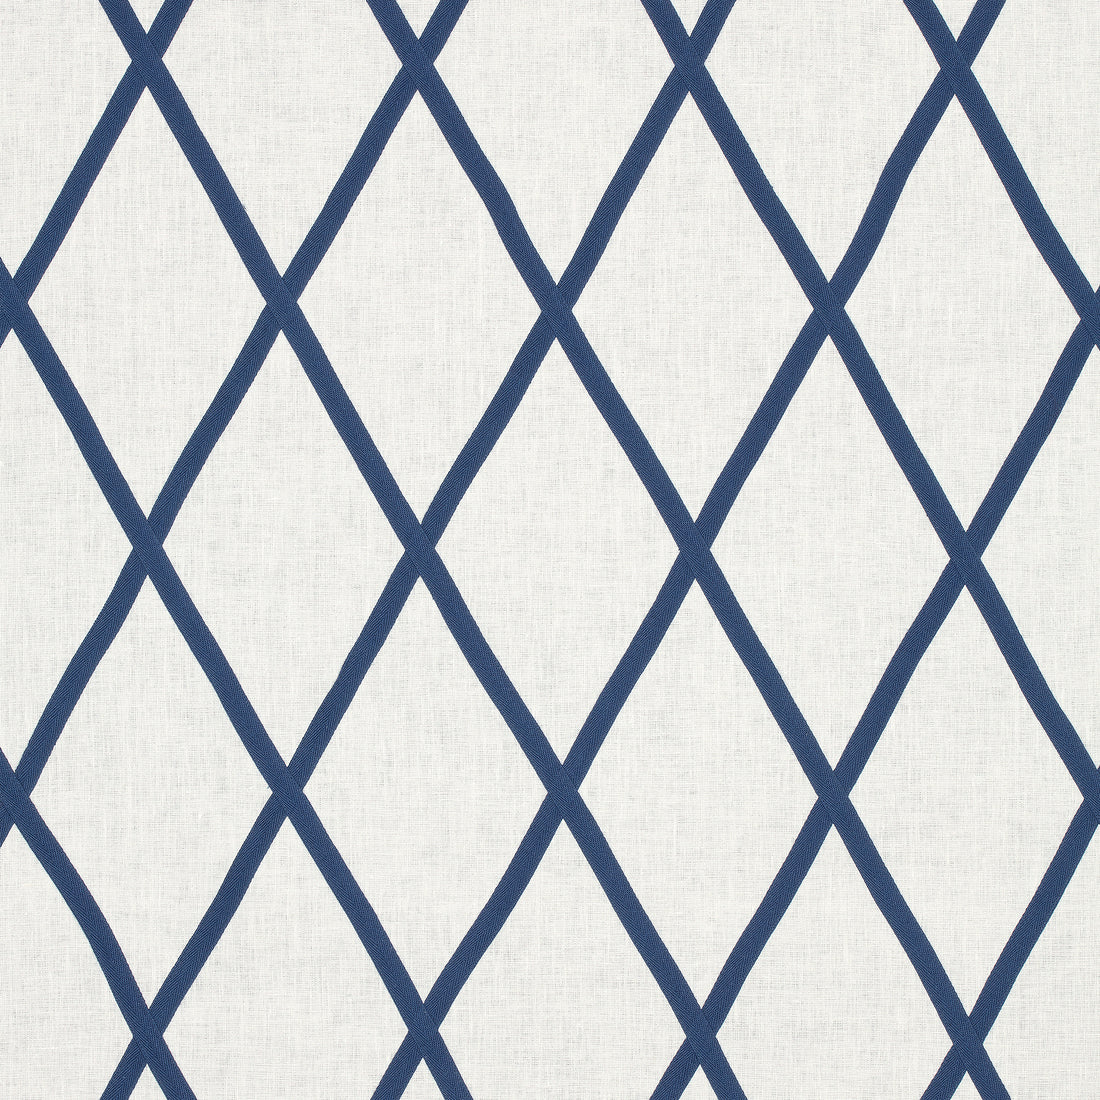 Tarascon Trellis Applique fabric in navy on white color - pattern number AW78708 - by Anna French in the Palampore collection